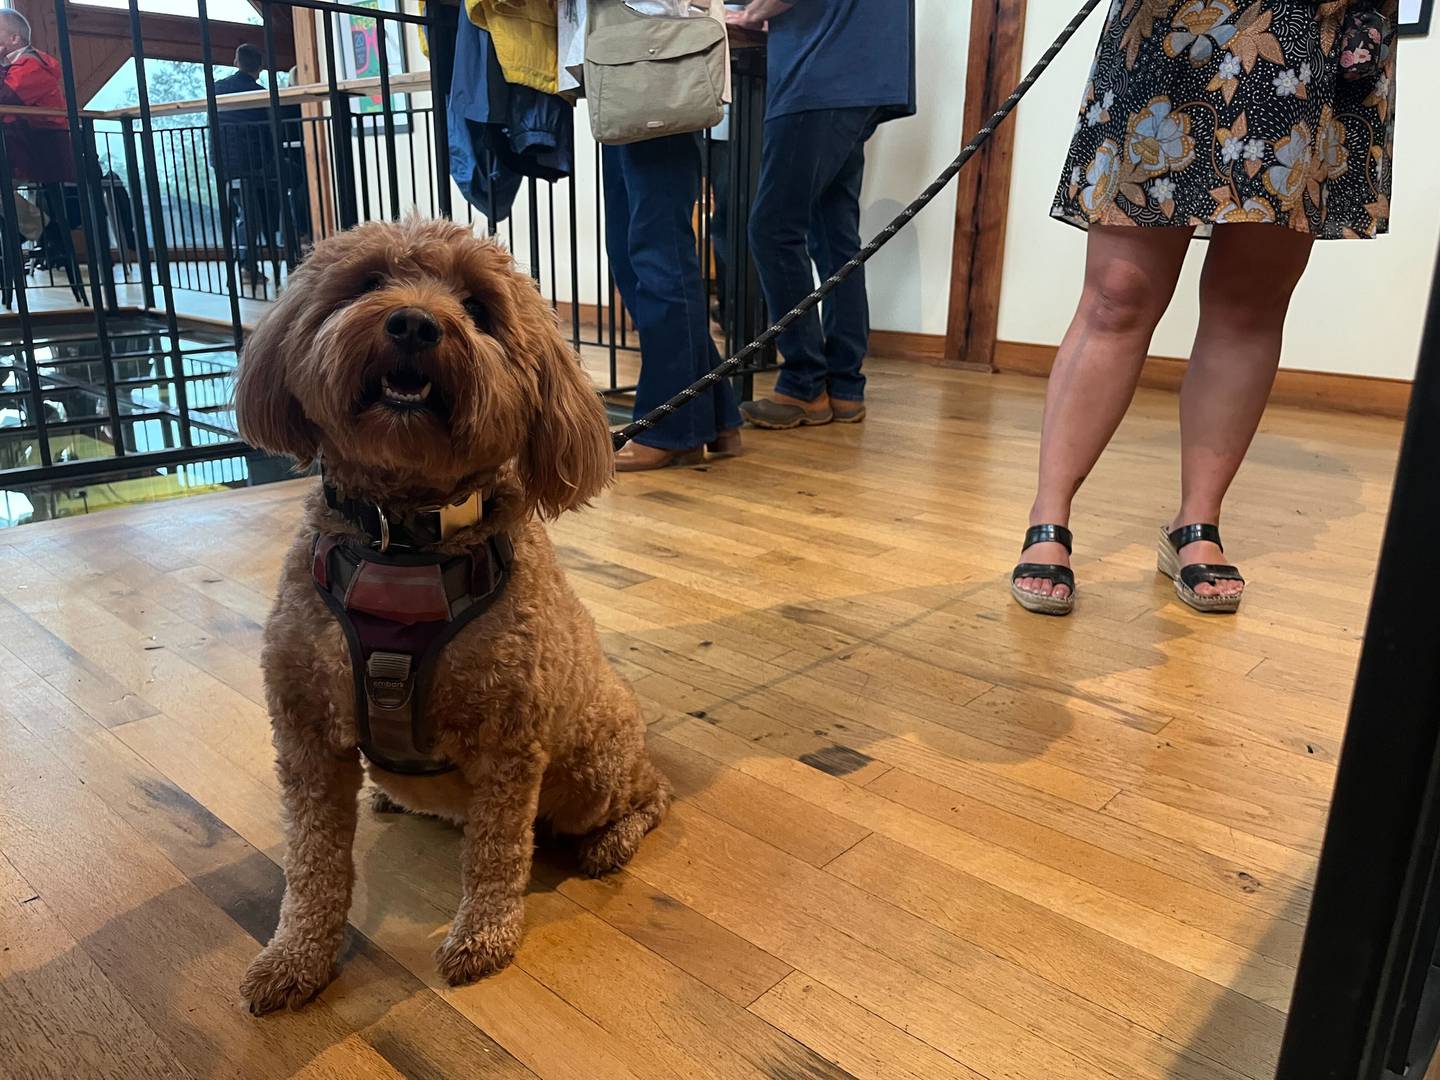 Mango, the mini Goldendoodle, eagerly approached guests at the Blenheim Vineyards in Virginia.